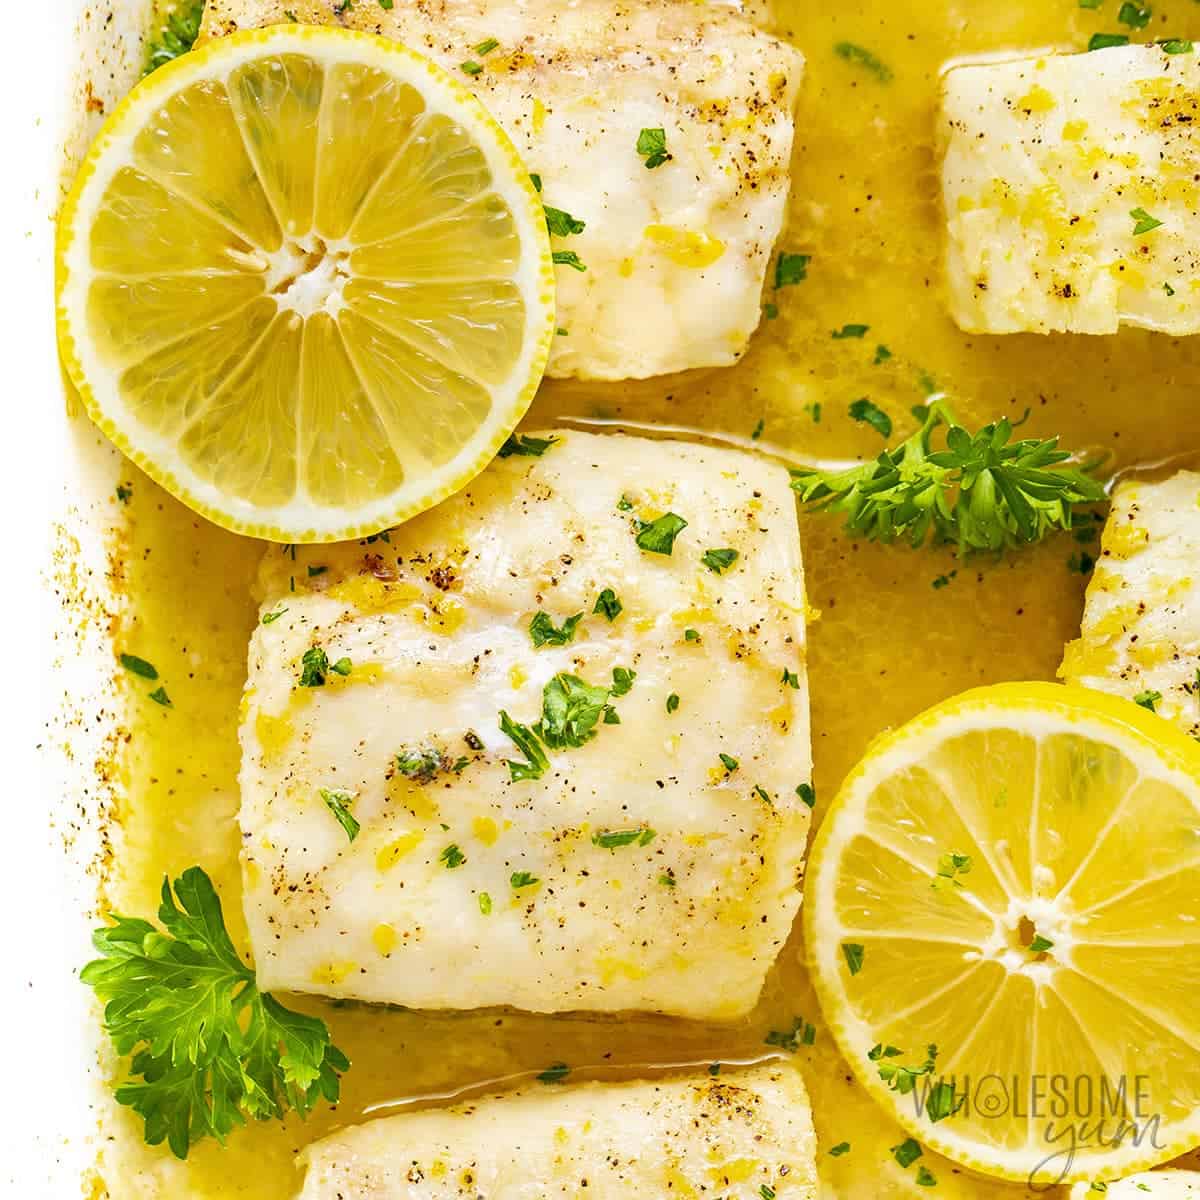 Baked cod in baking dish.